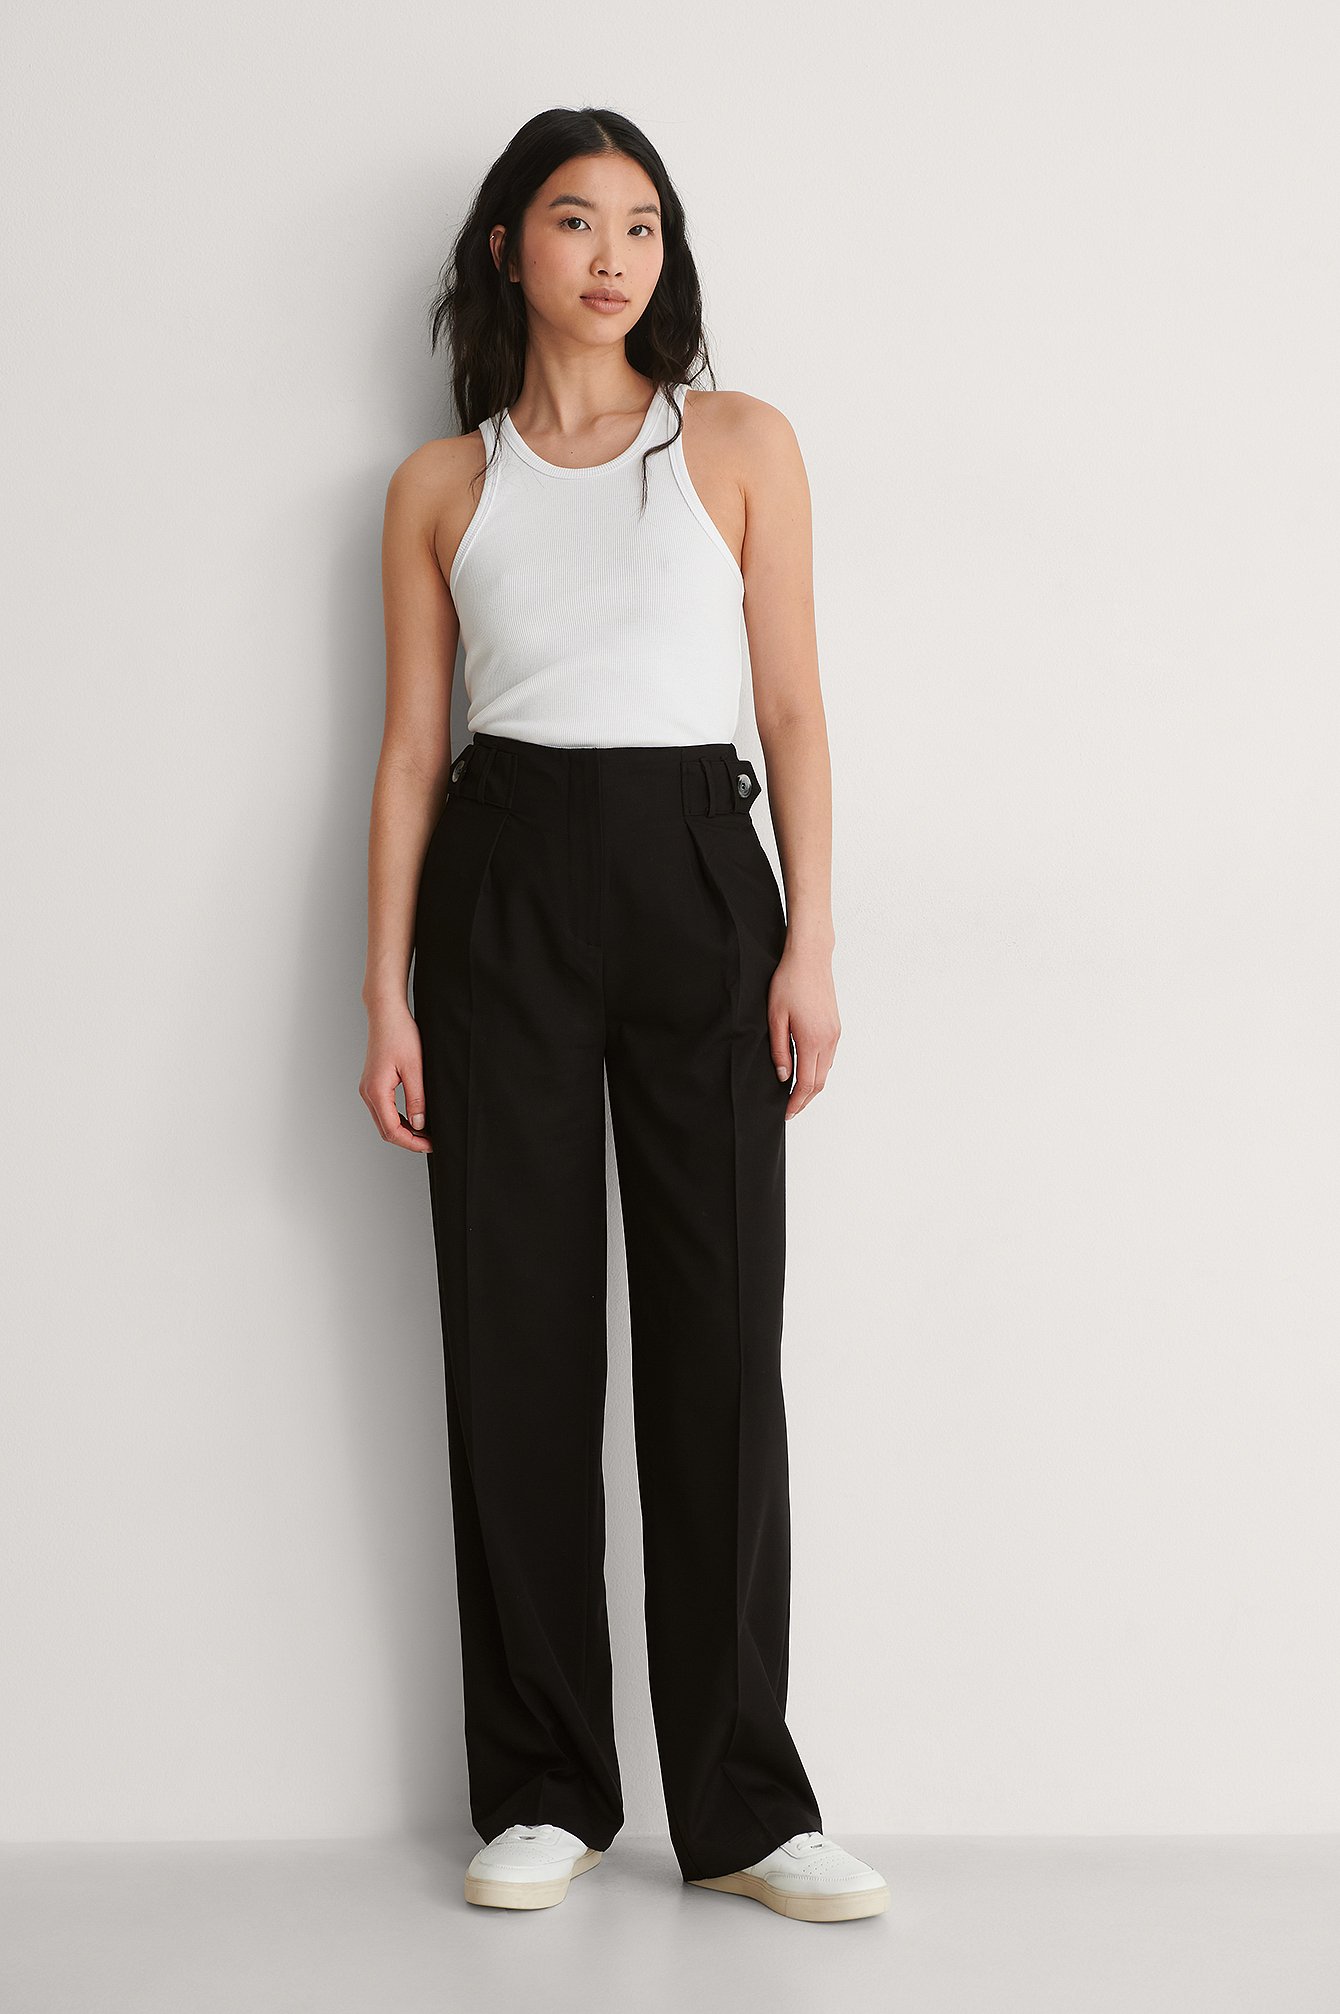 High Waist Trousers Outfit.